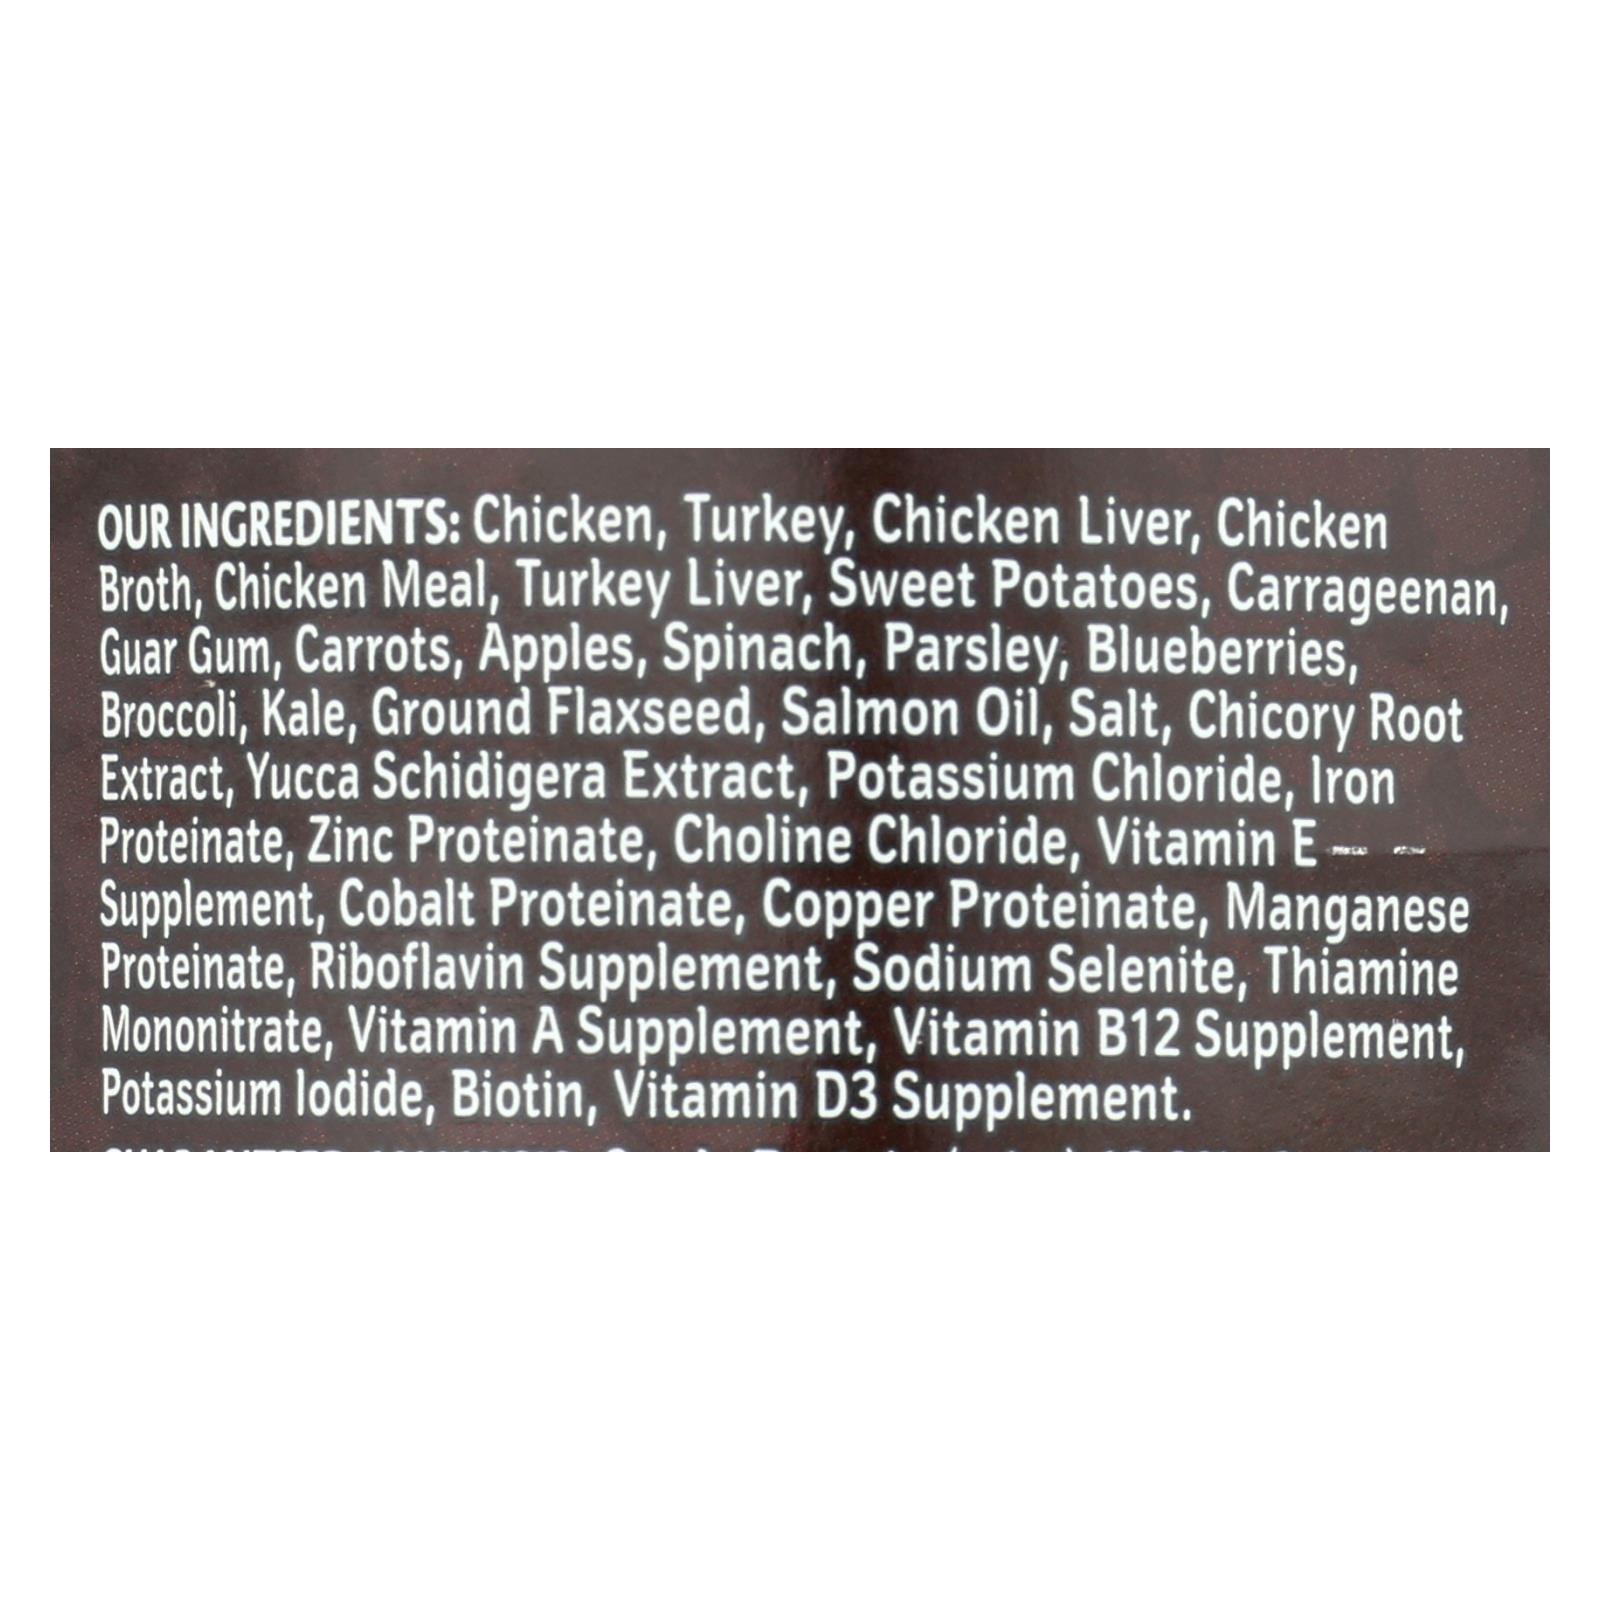 Wellness Pet Products Dog Food - Gain Free - Turkey And Chicken With Liver - Case Of 12 - 12.5 Oz.